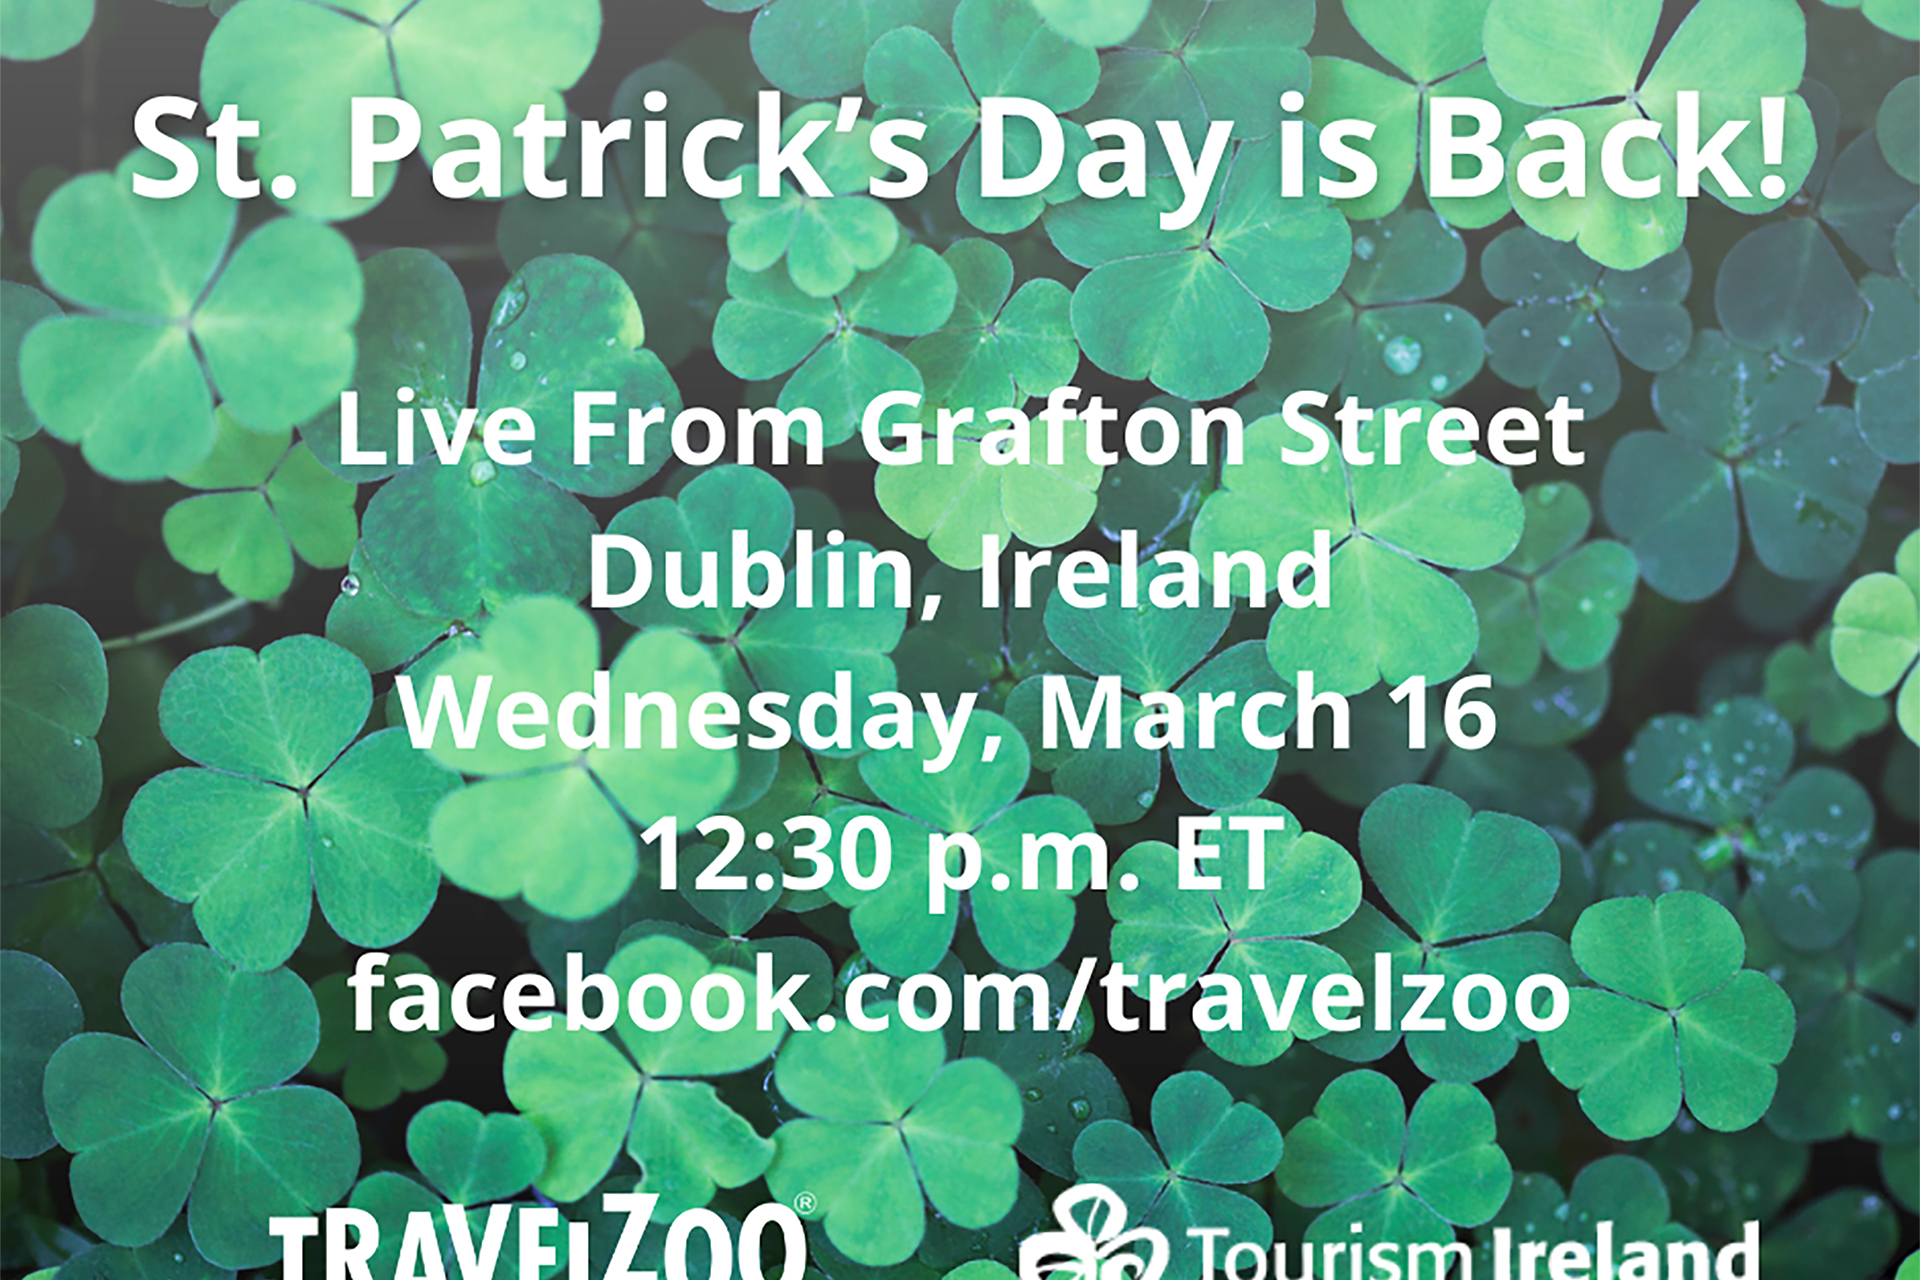 St. Patrick’s Day is Back!